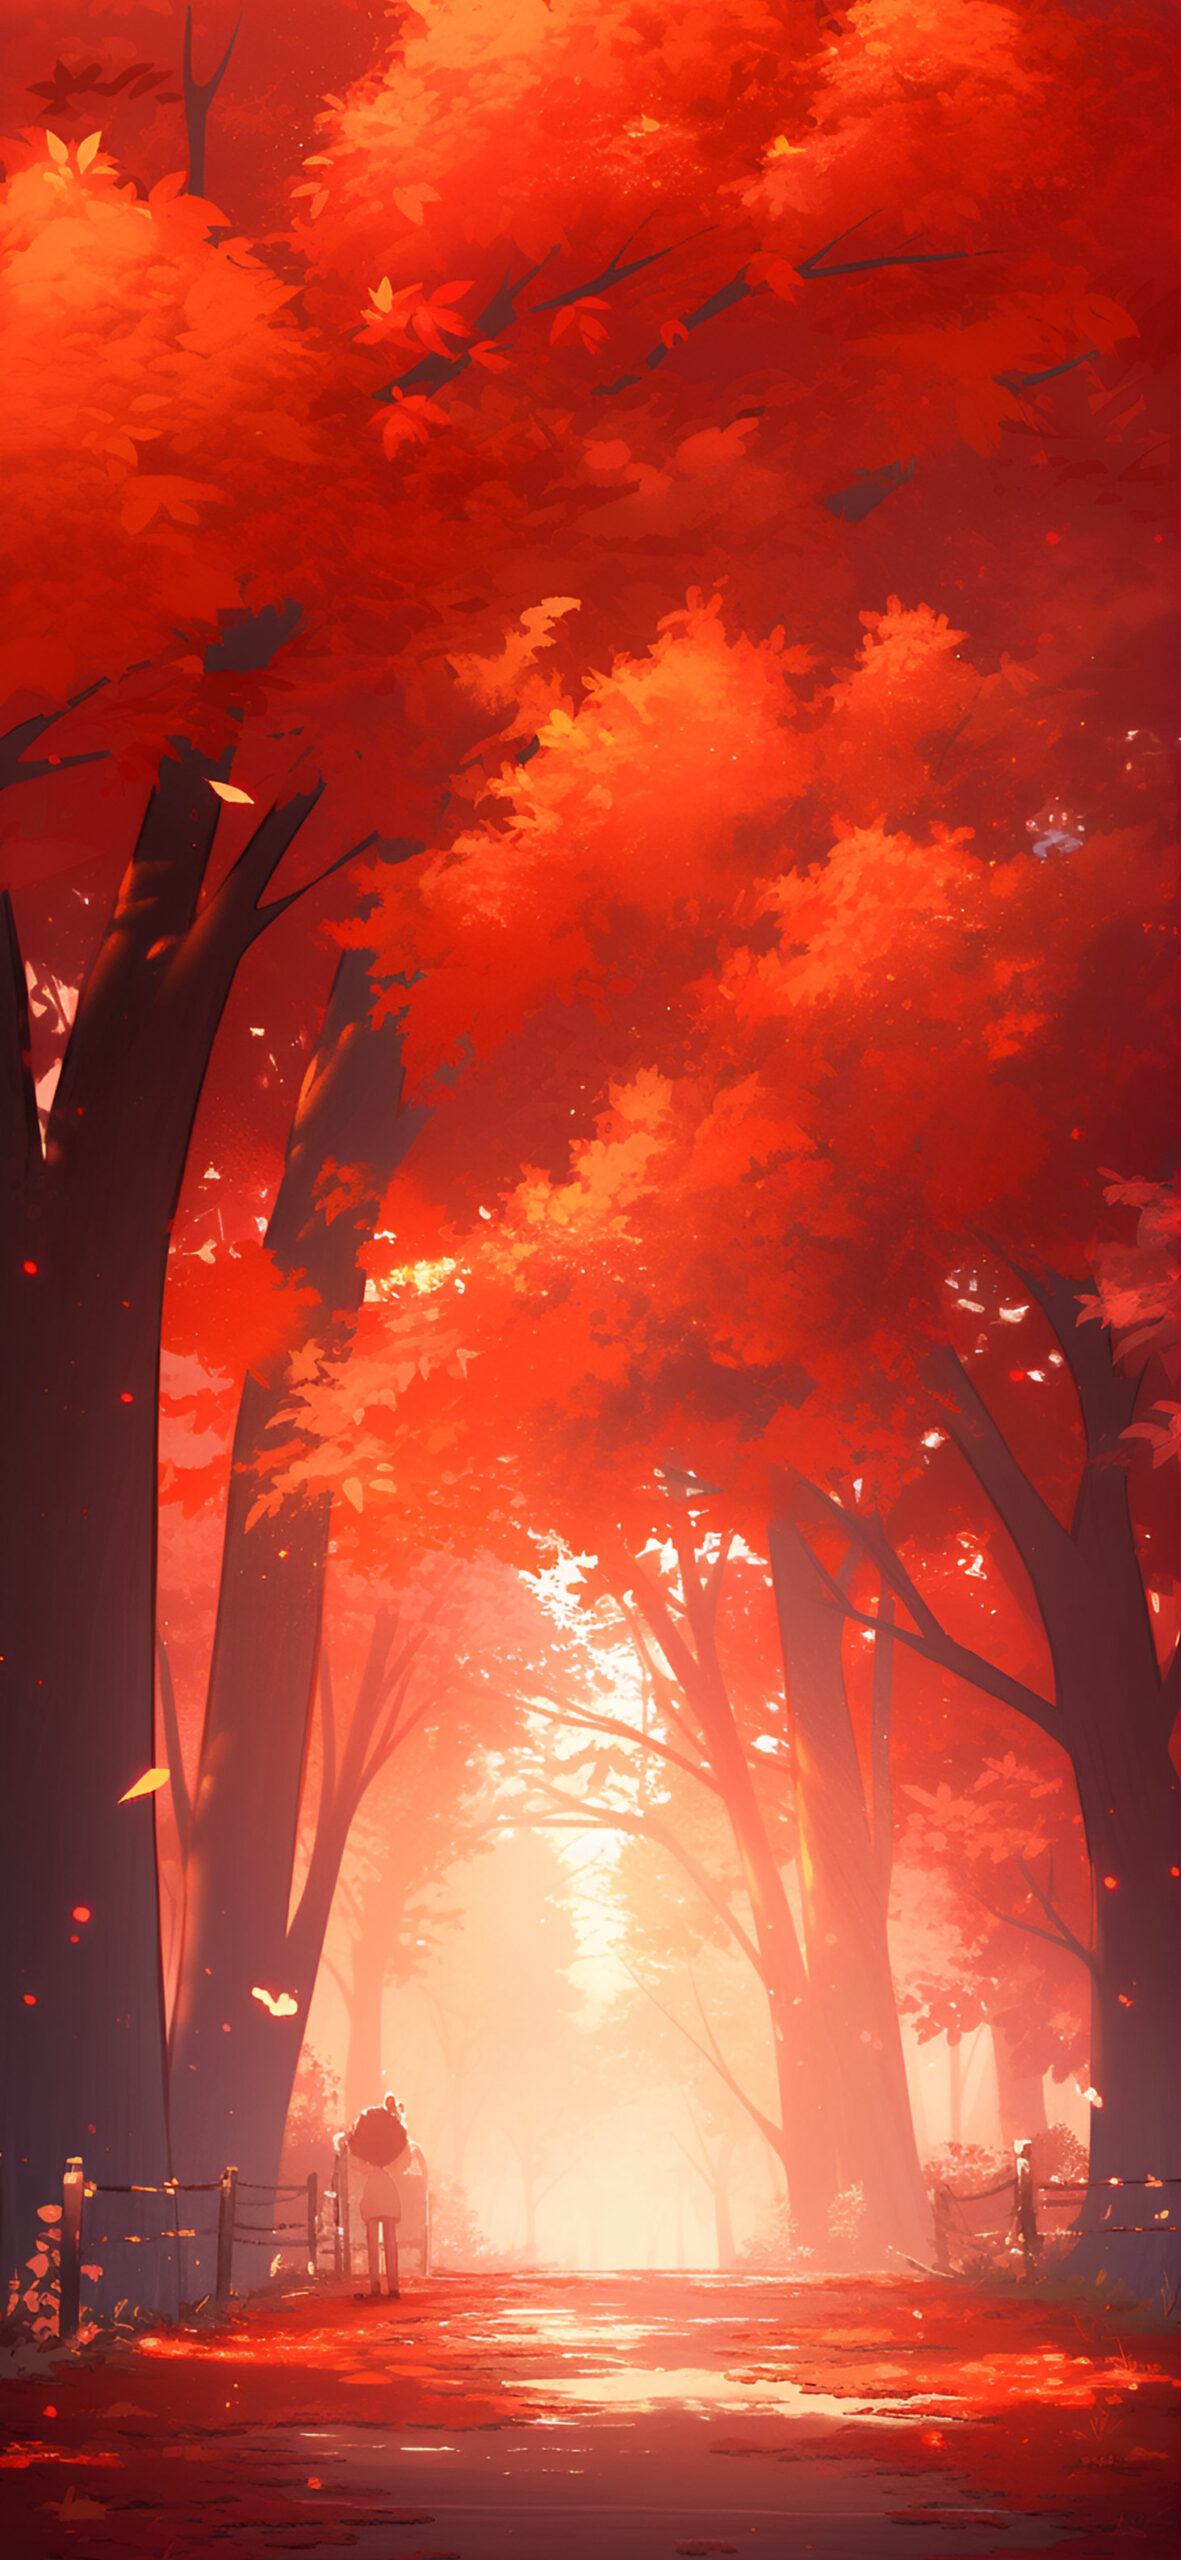 Aesthetic Red Autumn Forest Wallpaper Fall Wallpaper for iPhon